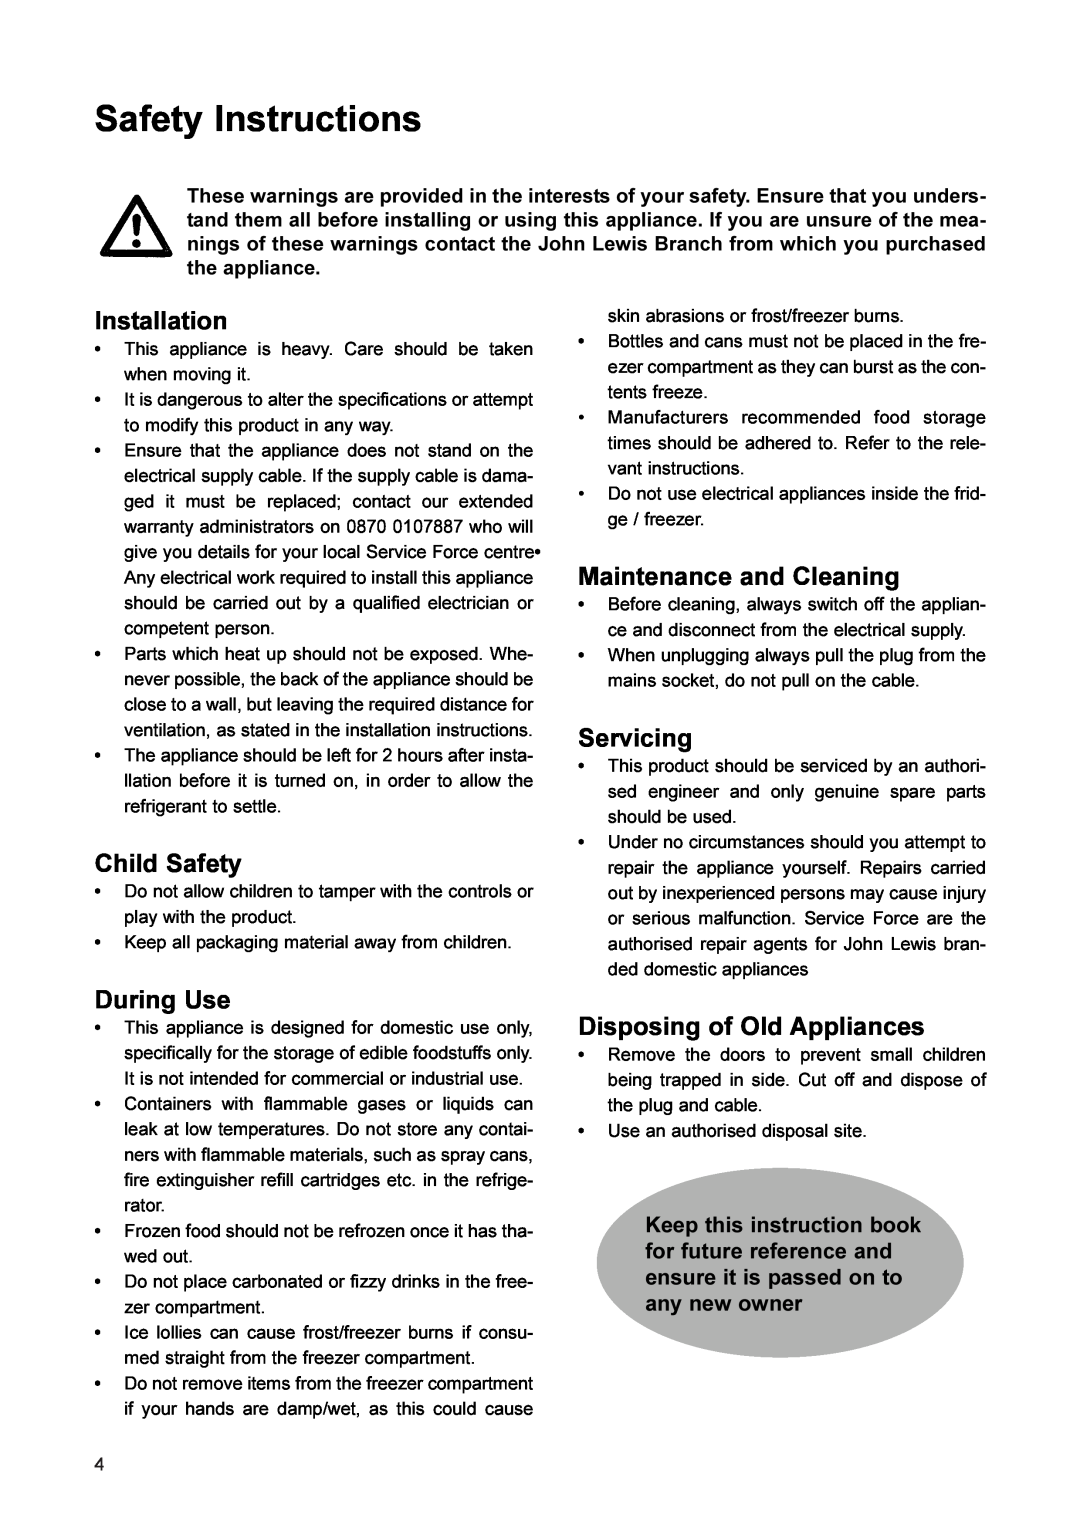 John Lewis JLFFS2002 Safety Instructions, Installation, Child Safety, Maintenance and Cleaning, Servicing, During Use 